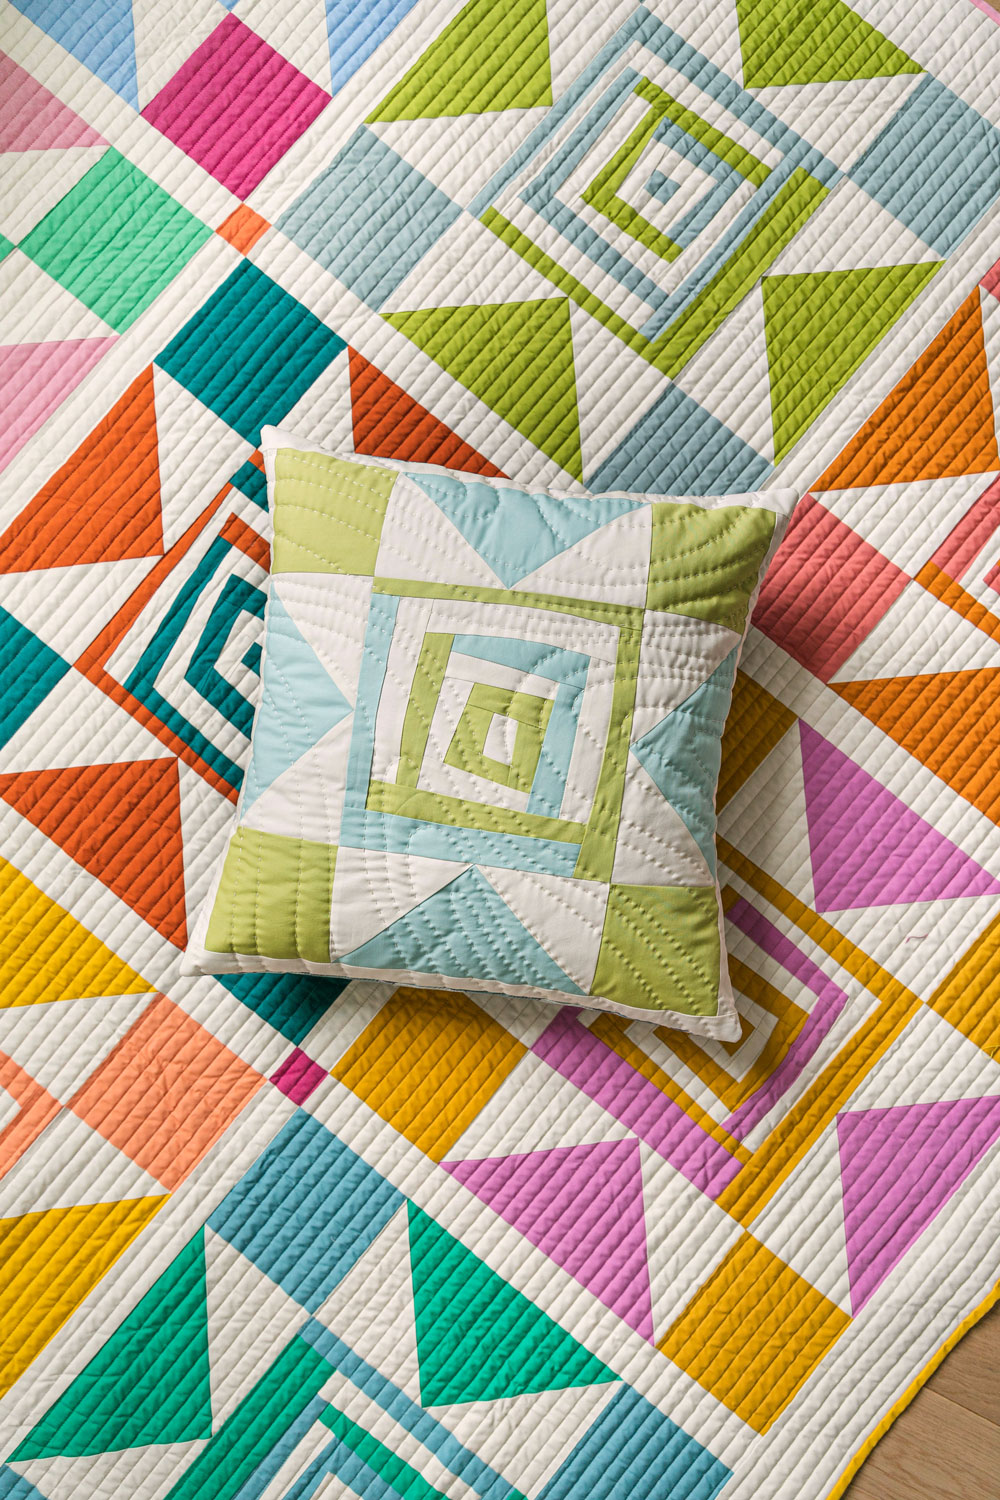 The Shining Star quilt and pillow pattern are perfect for precuts and scraps! Here are some tips on how to use scrap fabric you already have. suzyquilts.com #quilting #fabric